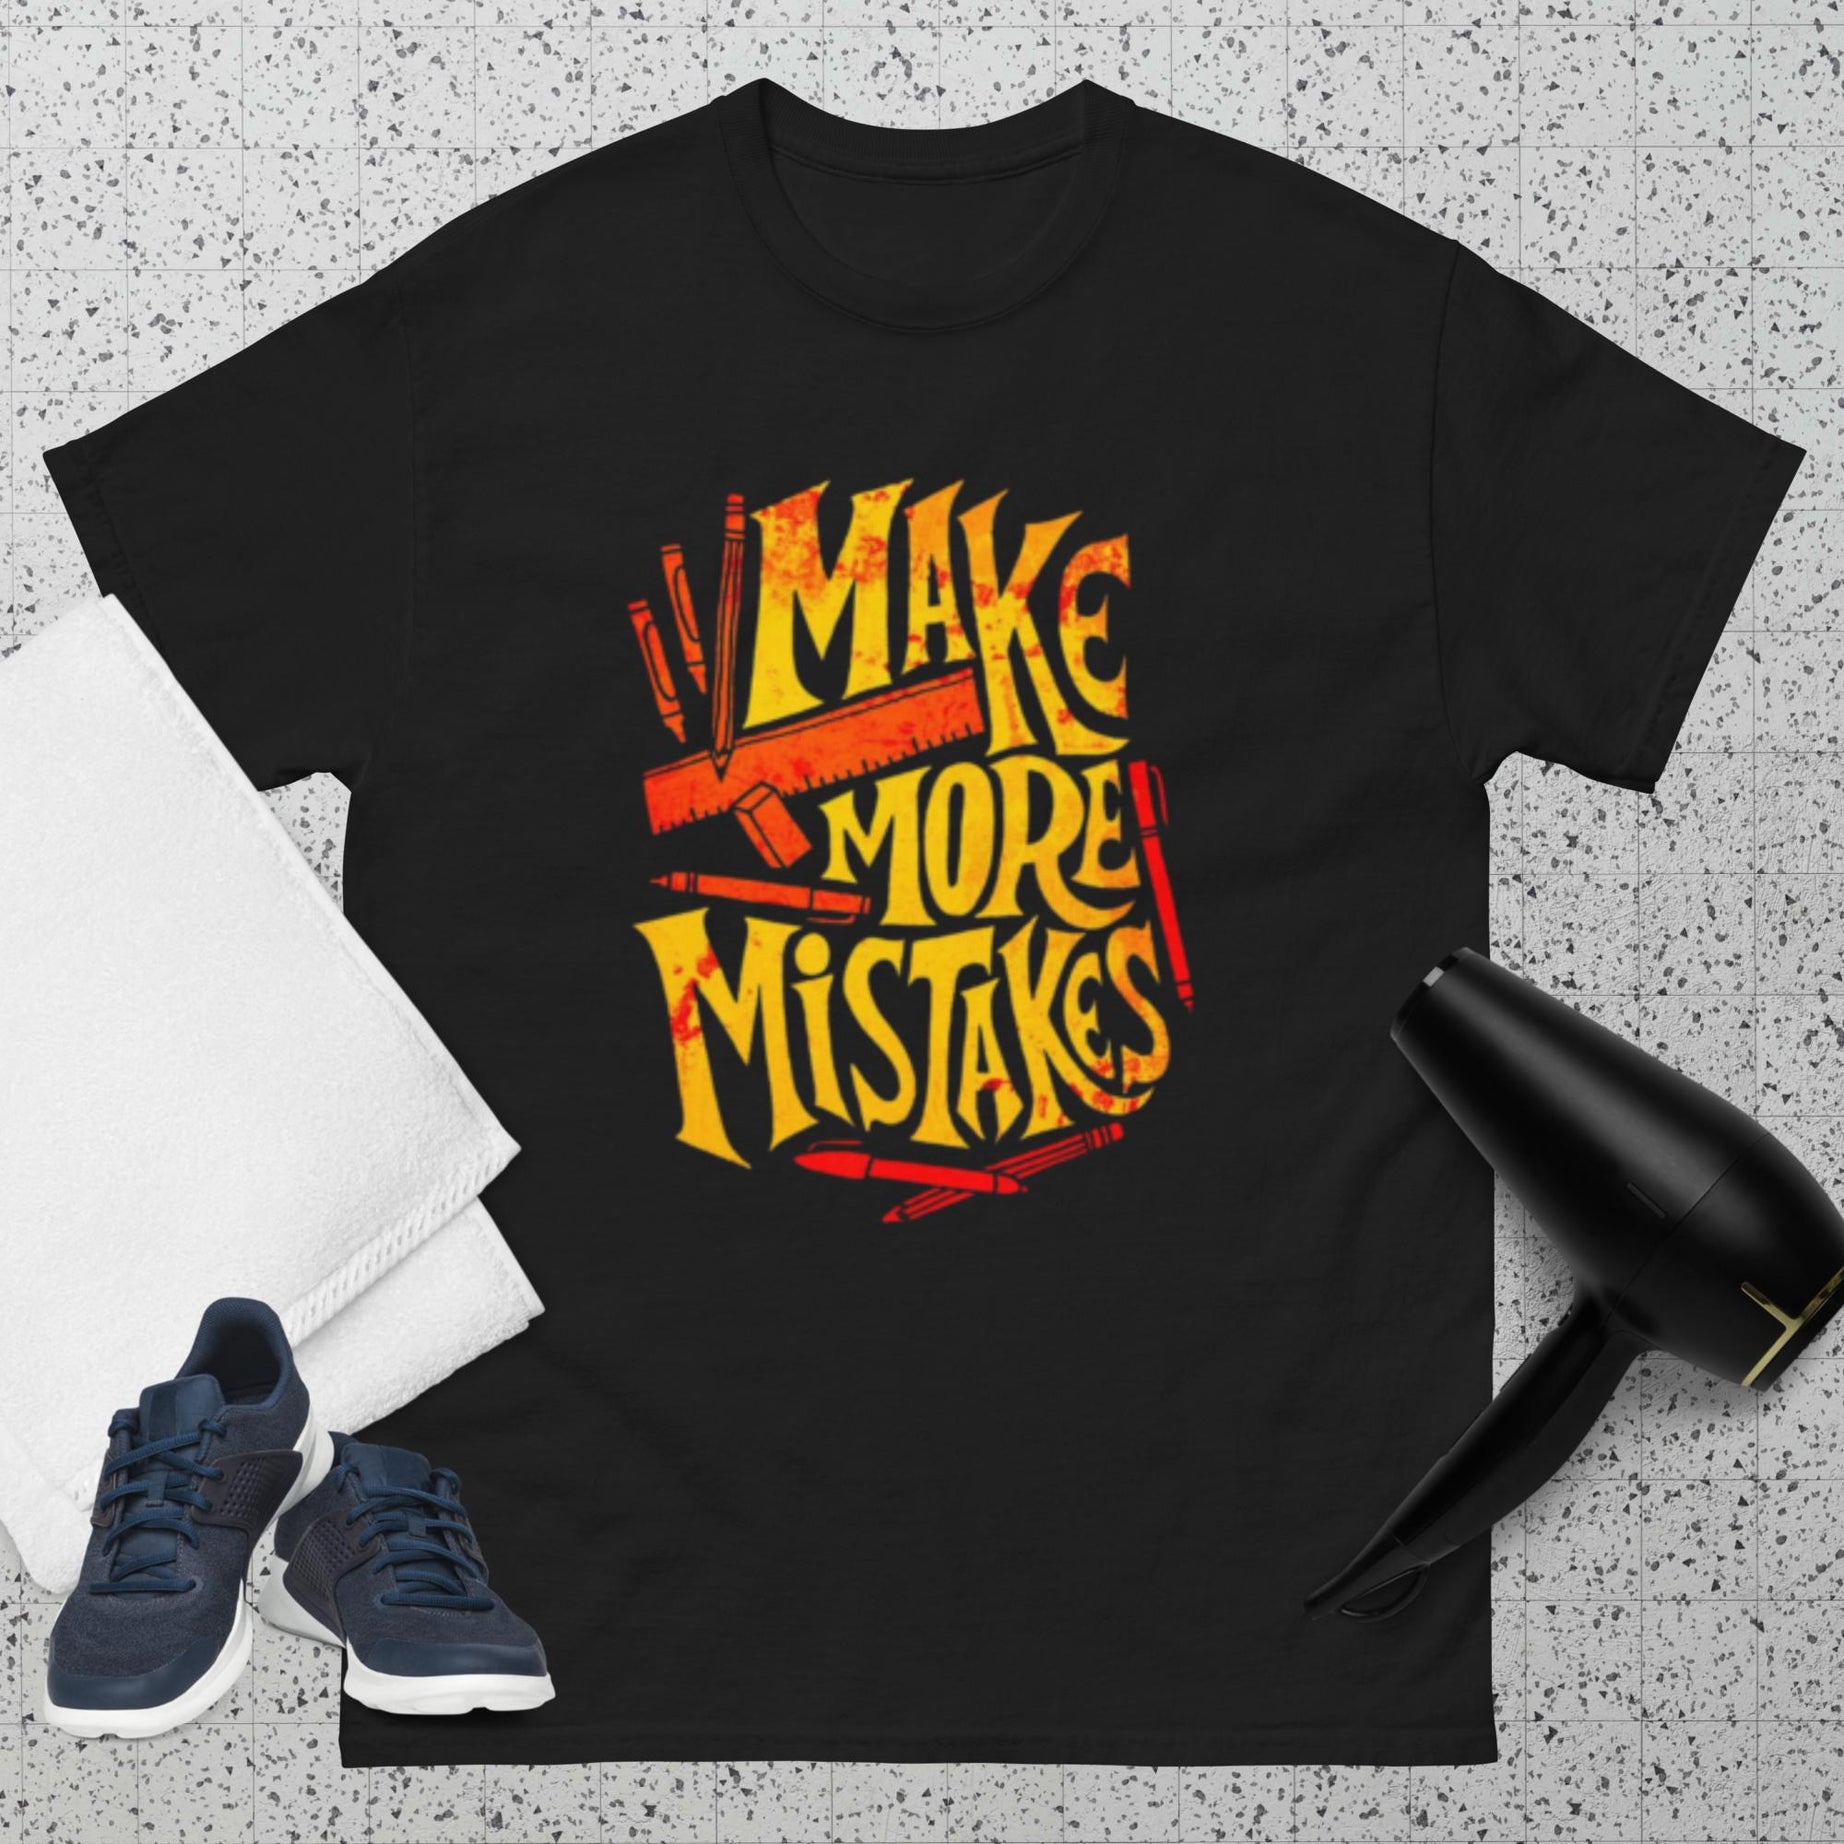 MAKE MORE MISTAKES T-SHIRT